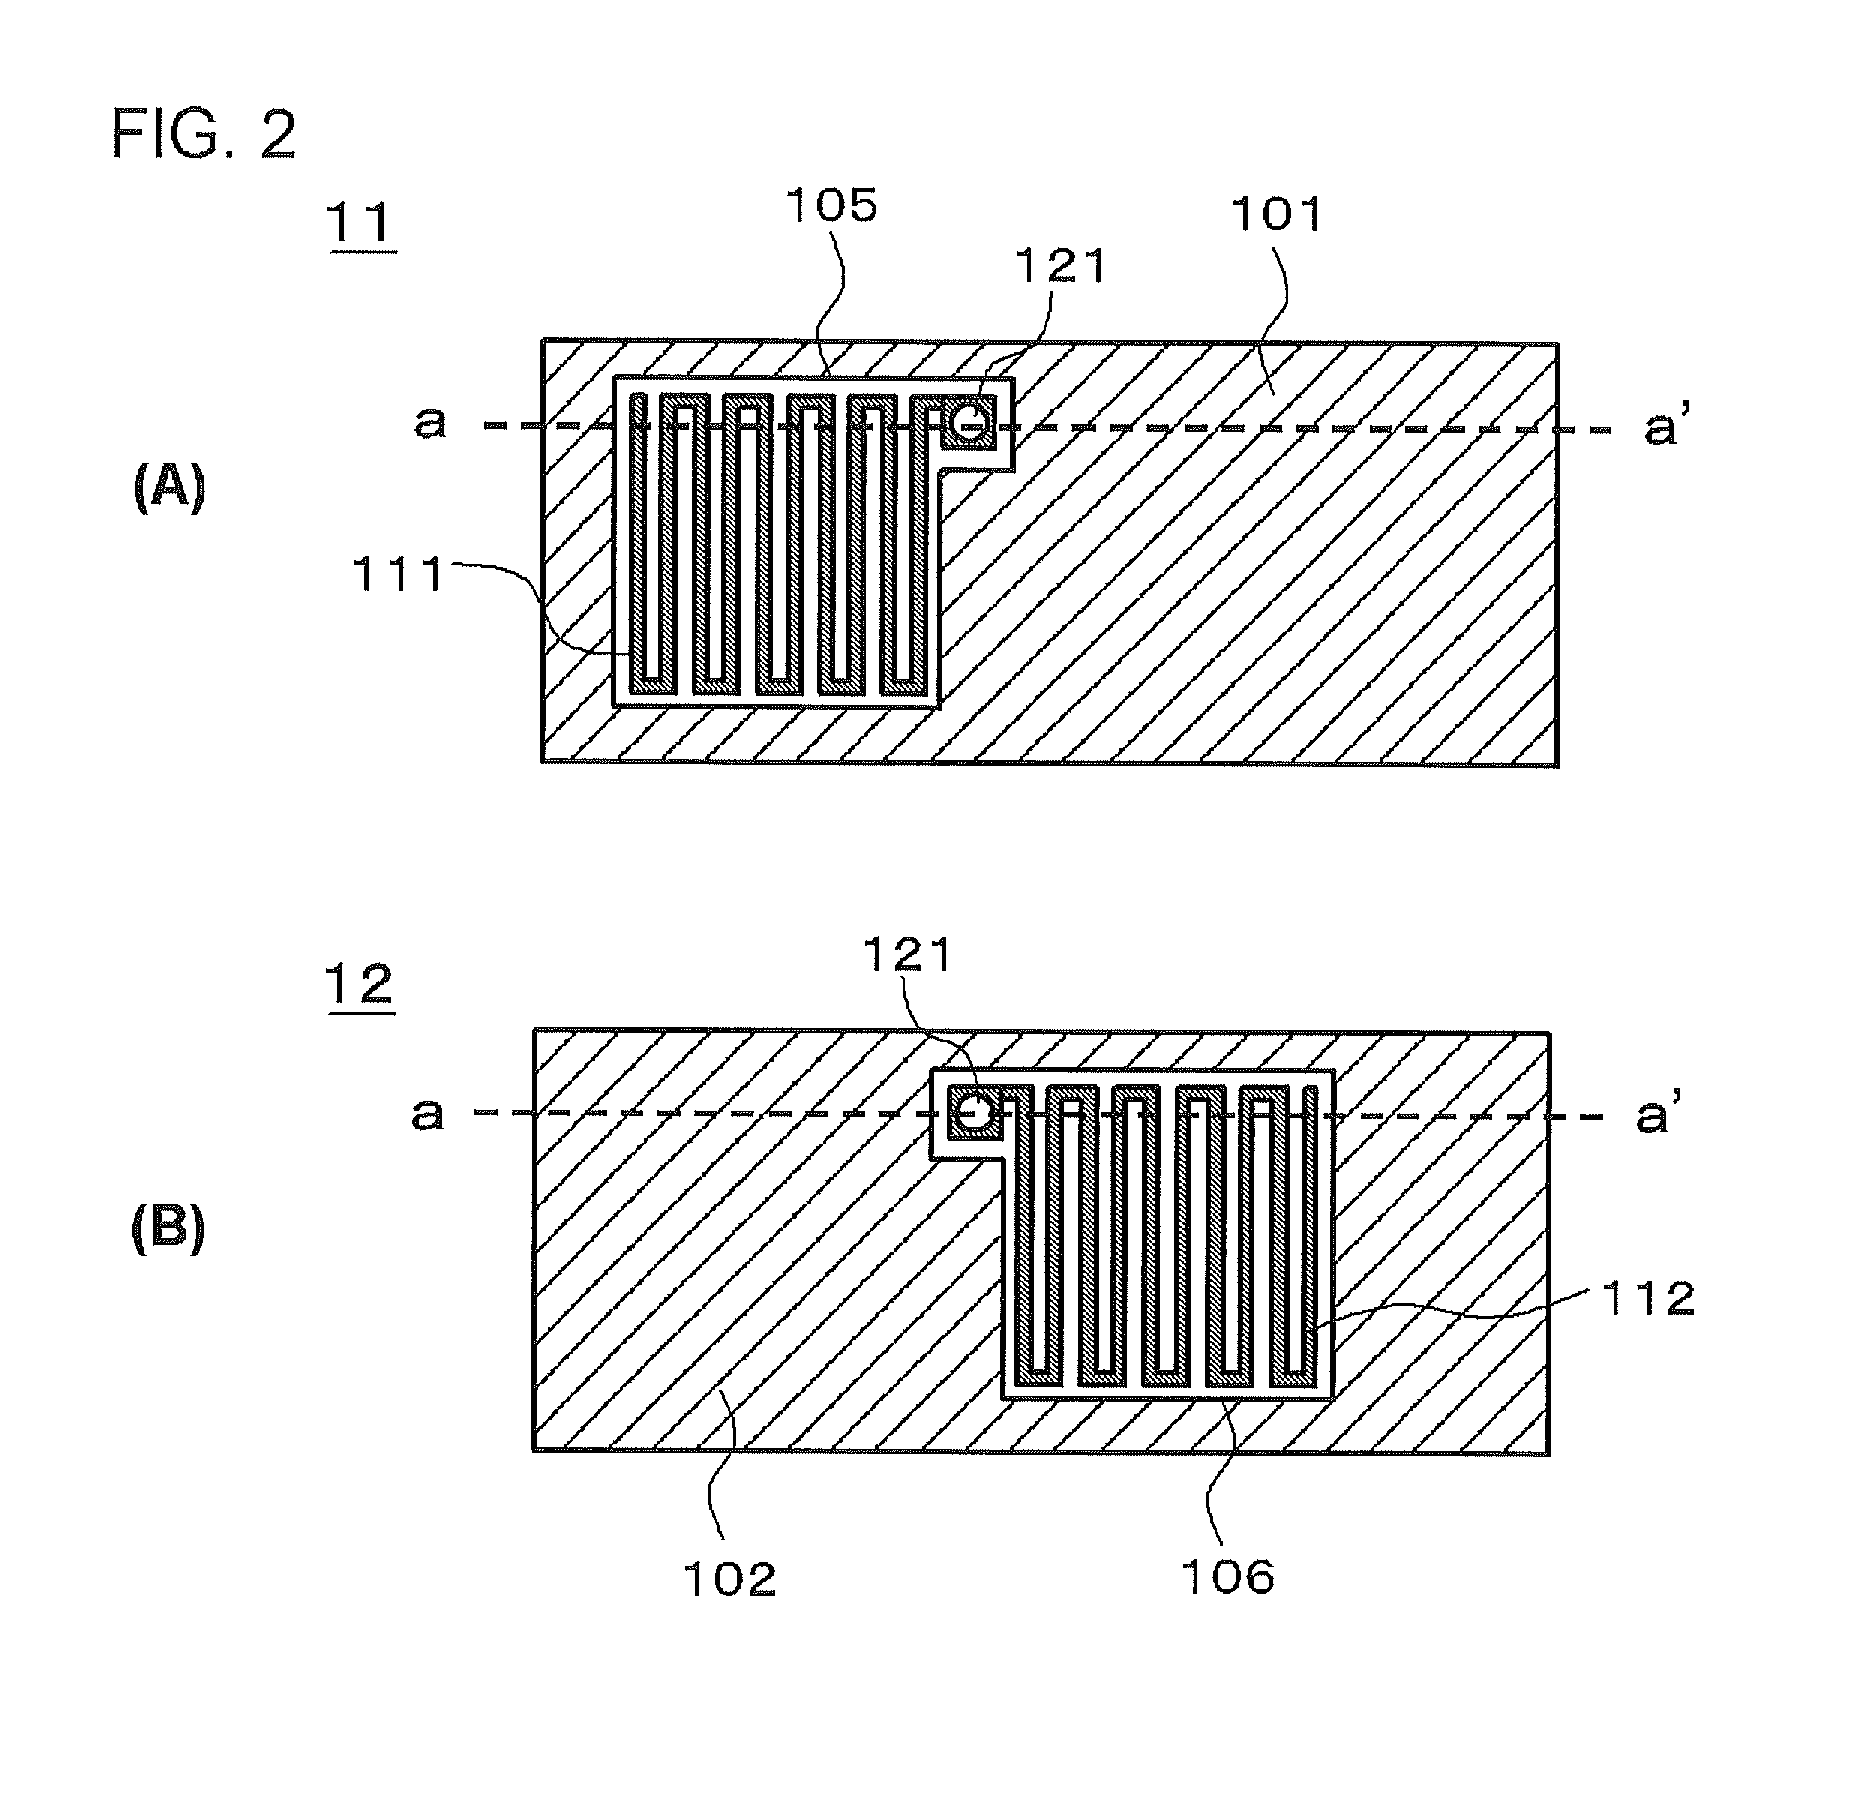 Structural body and interconnect substrate